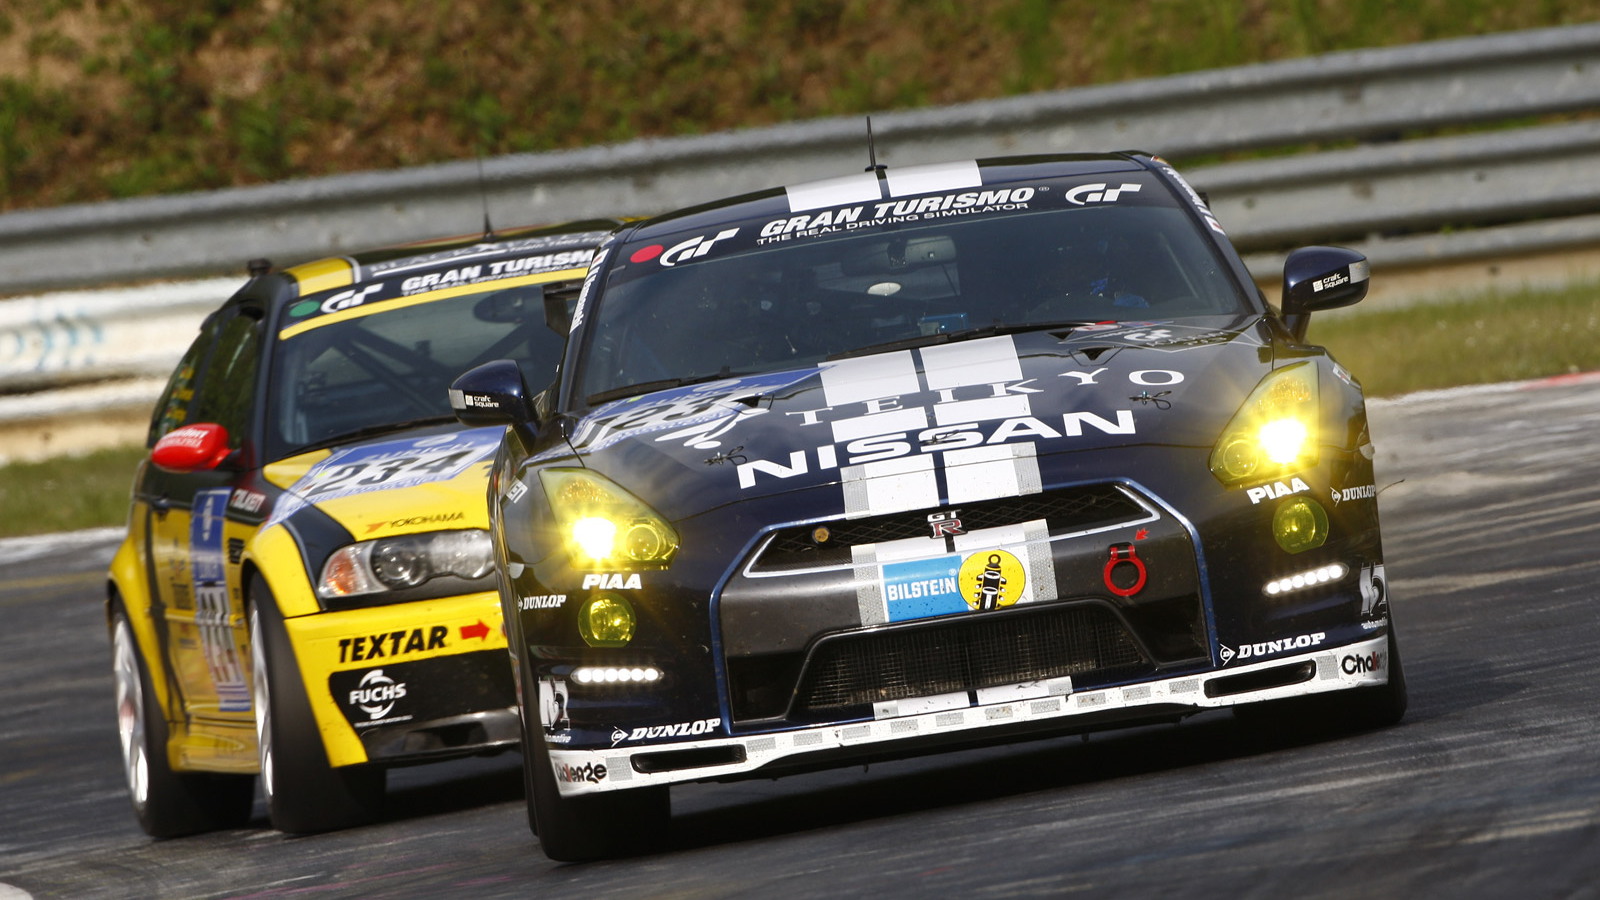 2013 Nissan GT-R (Club Track Edition) in the Nürburgring 24 Hours